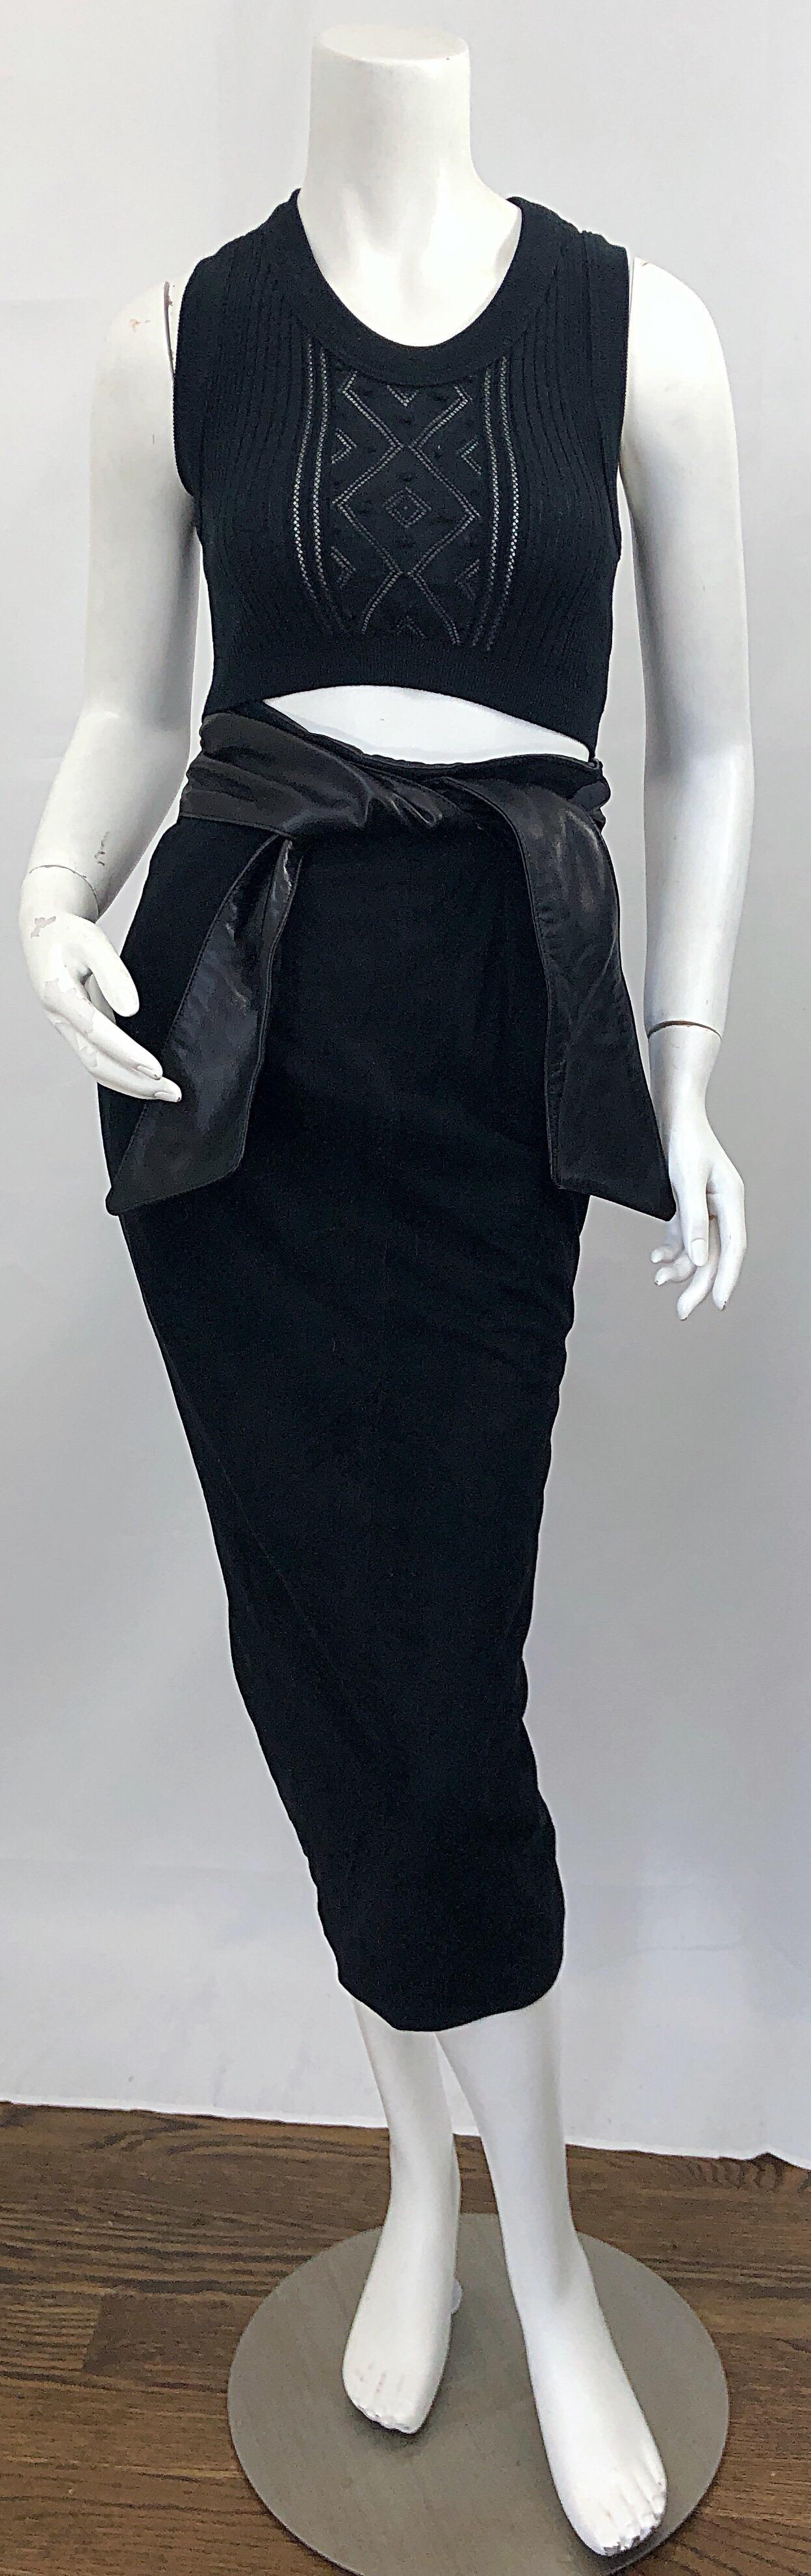 1990s Vakko Black Suede + Leather Size 4 High Waisted Vintage 90s Midi Skirt 6